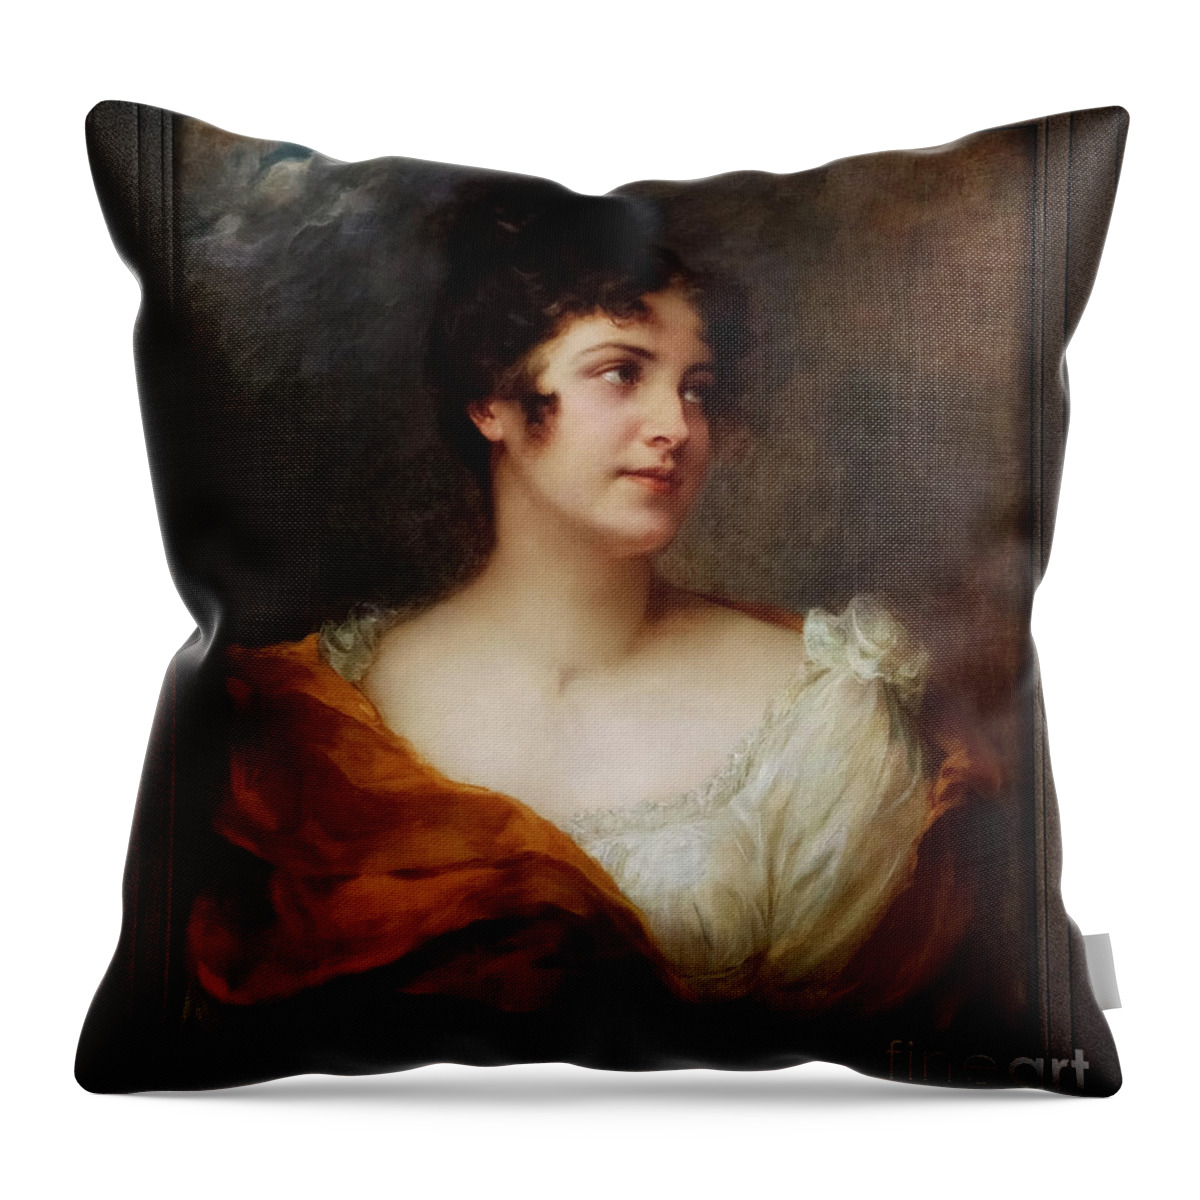 Portrait Of A Lady Throw Pillow featuring the painting Portrait Of A Lady by Georg Papperitz Old Masters Reproduction Classical Art by Rolando Burbon